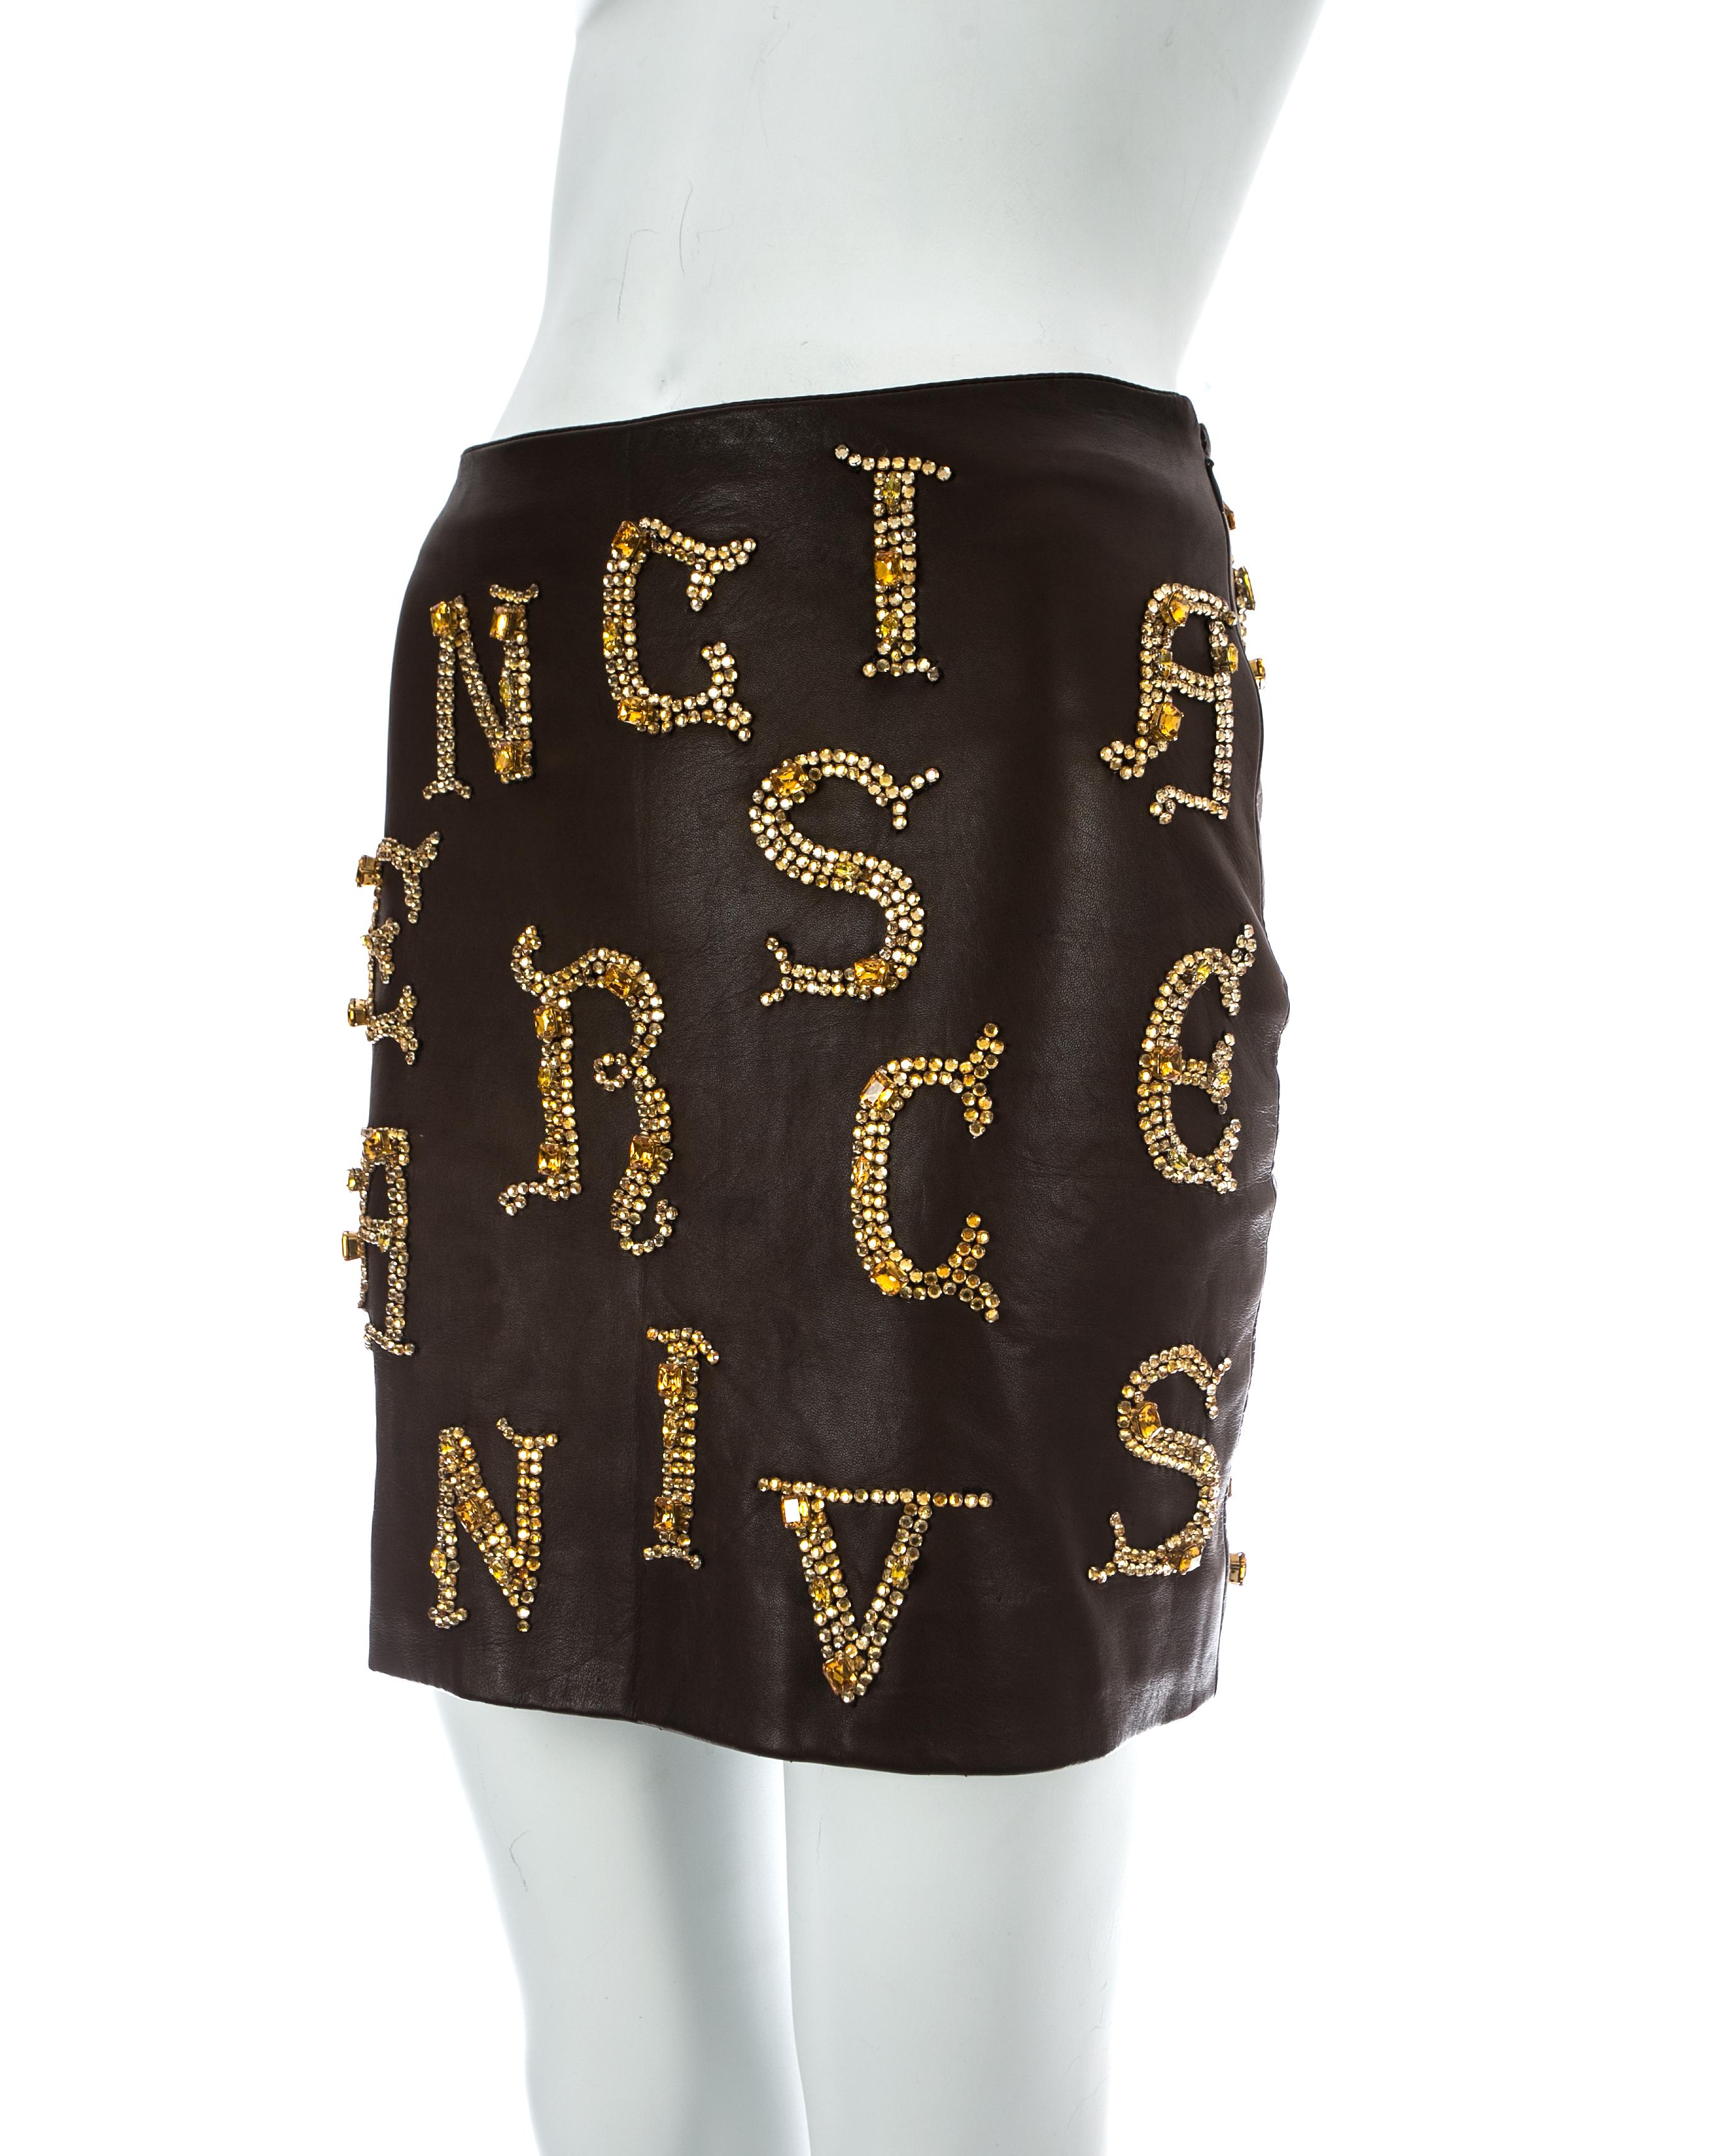 Women's Gianni Versace brown leather skirt with gold crystal embellishment, fw 1997